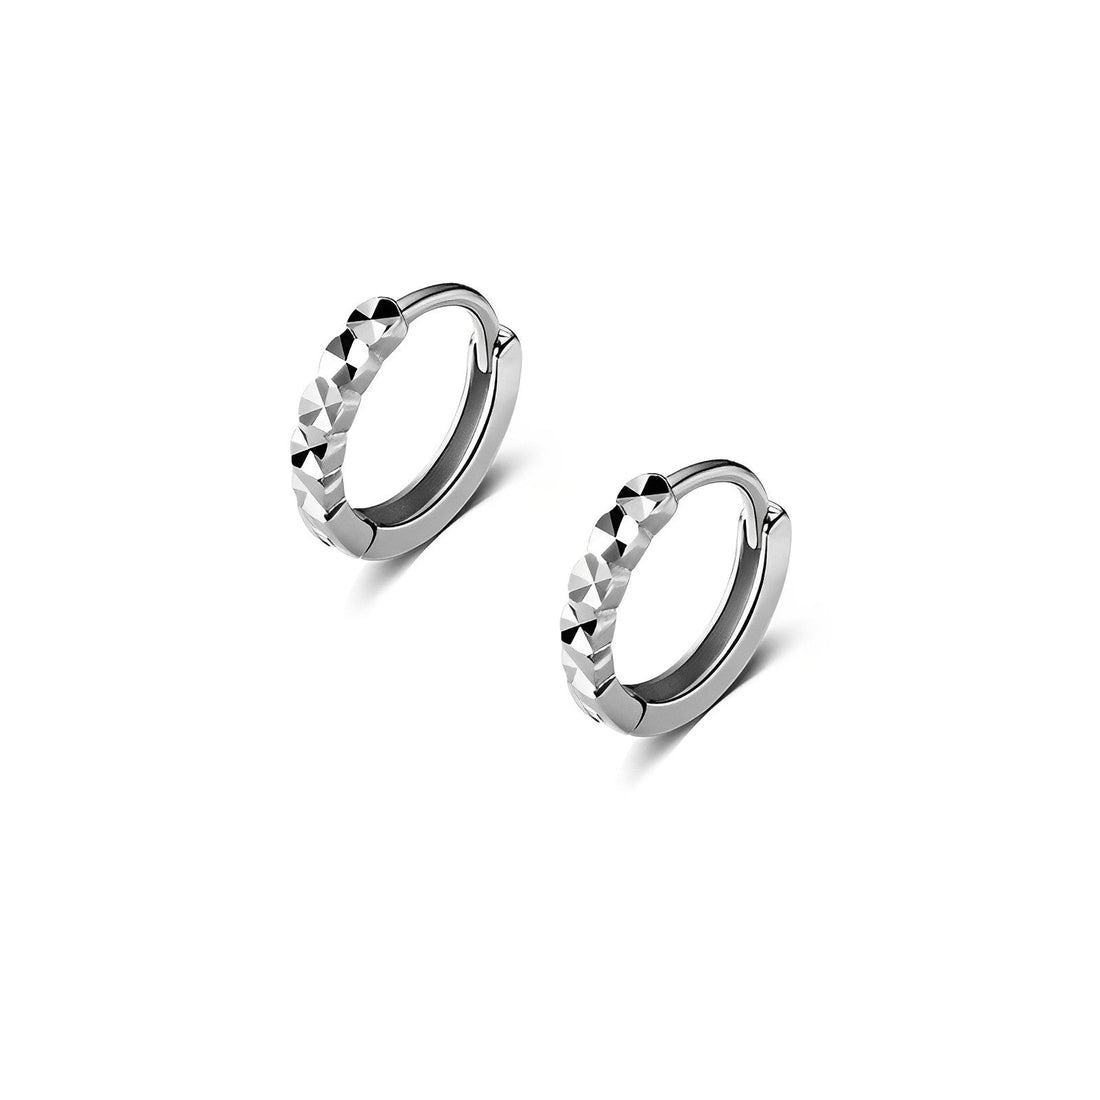 Anyco Fashion Earrings Silver Real 925 Sterling Punk Hip Hop Link Chain Ear Buckle for Women Men Goth Rock Party Jewelry Accessories-Earrings-PEROZ Accessories